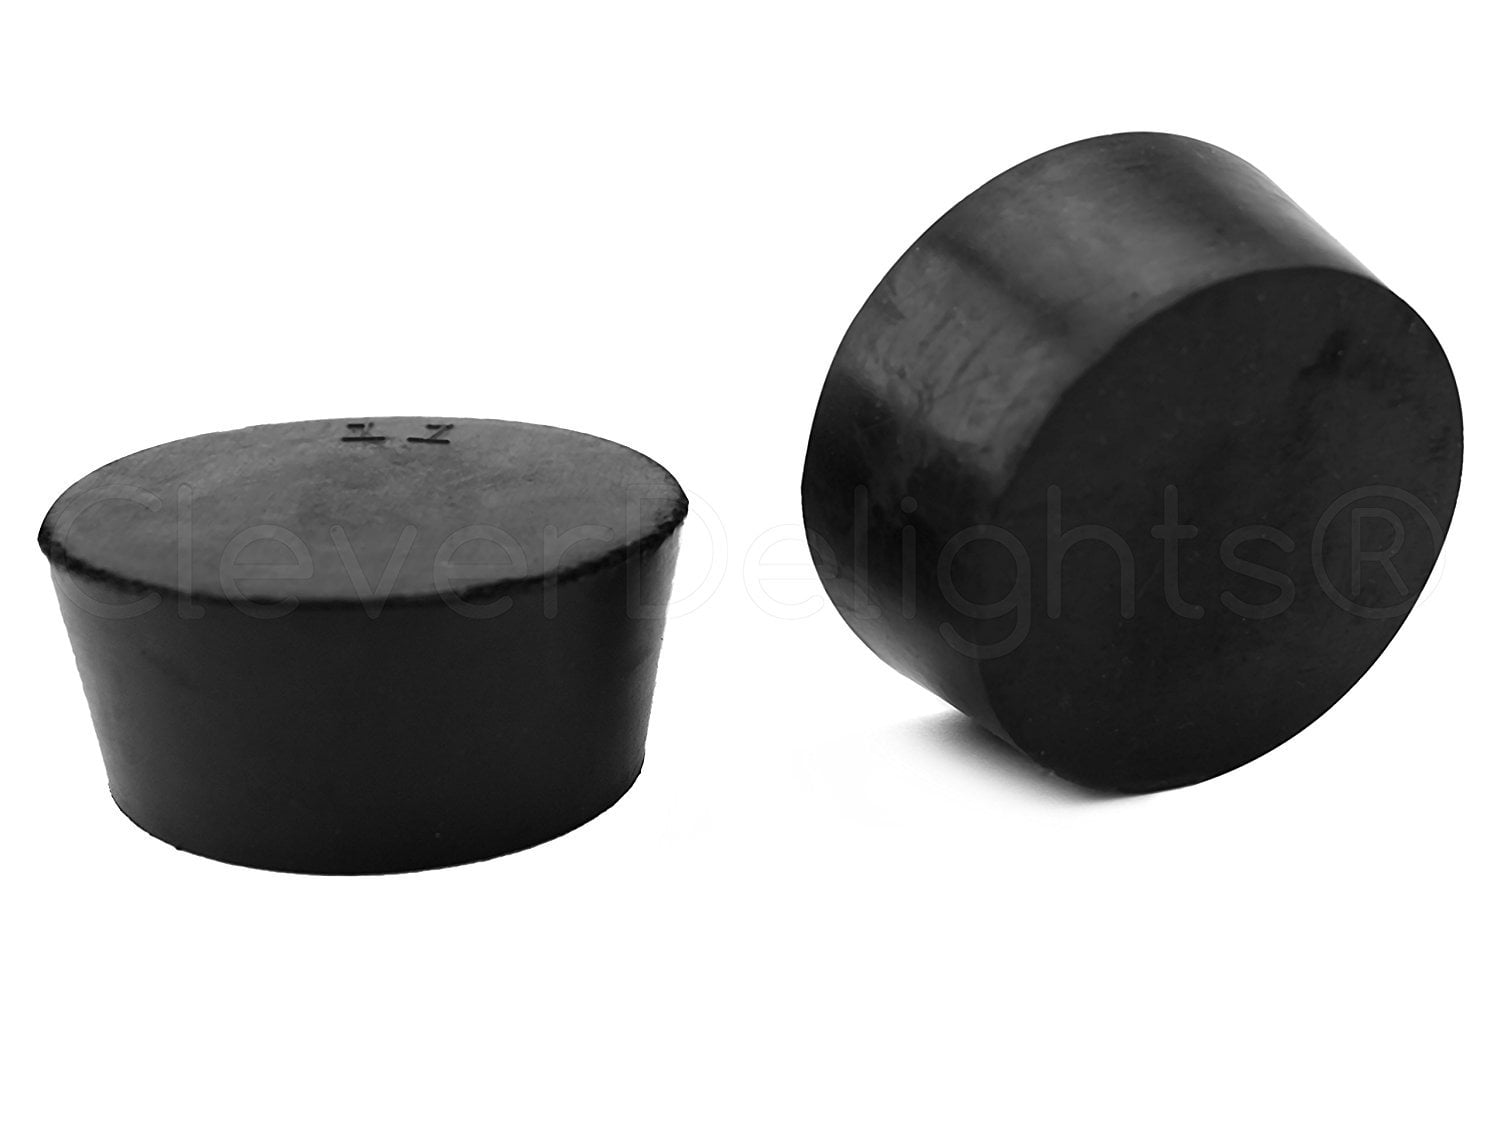 39mm Long Size 14-90mm x 75mm CleverDelights Solid Rubber Stoppers Black Plug Lab #14 6 Pack